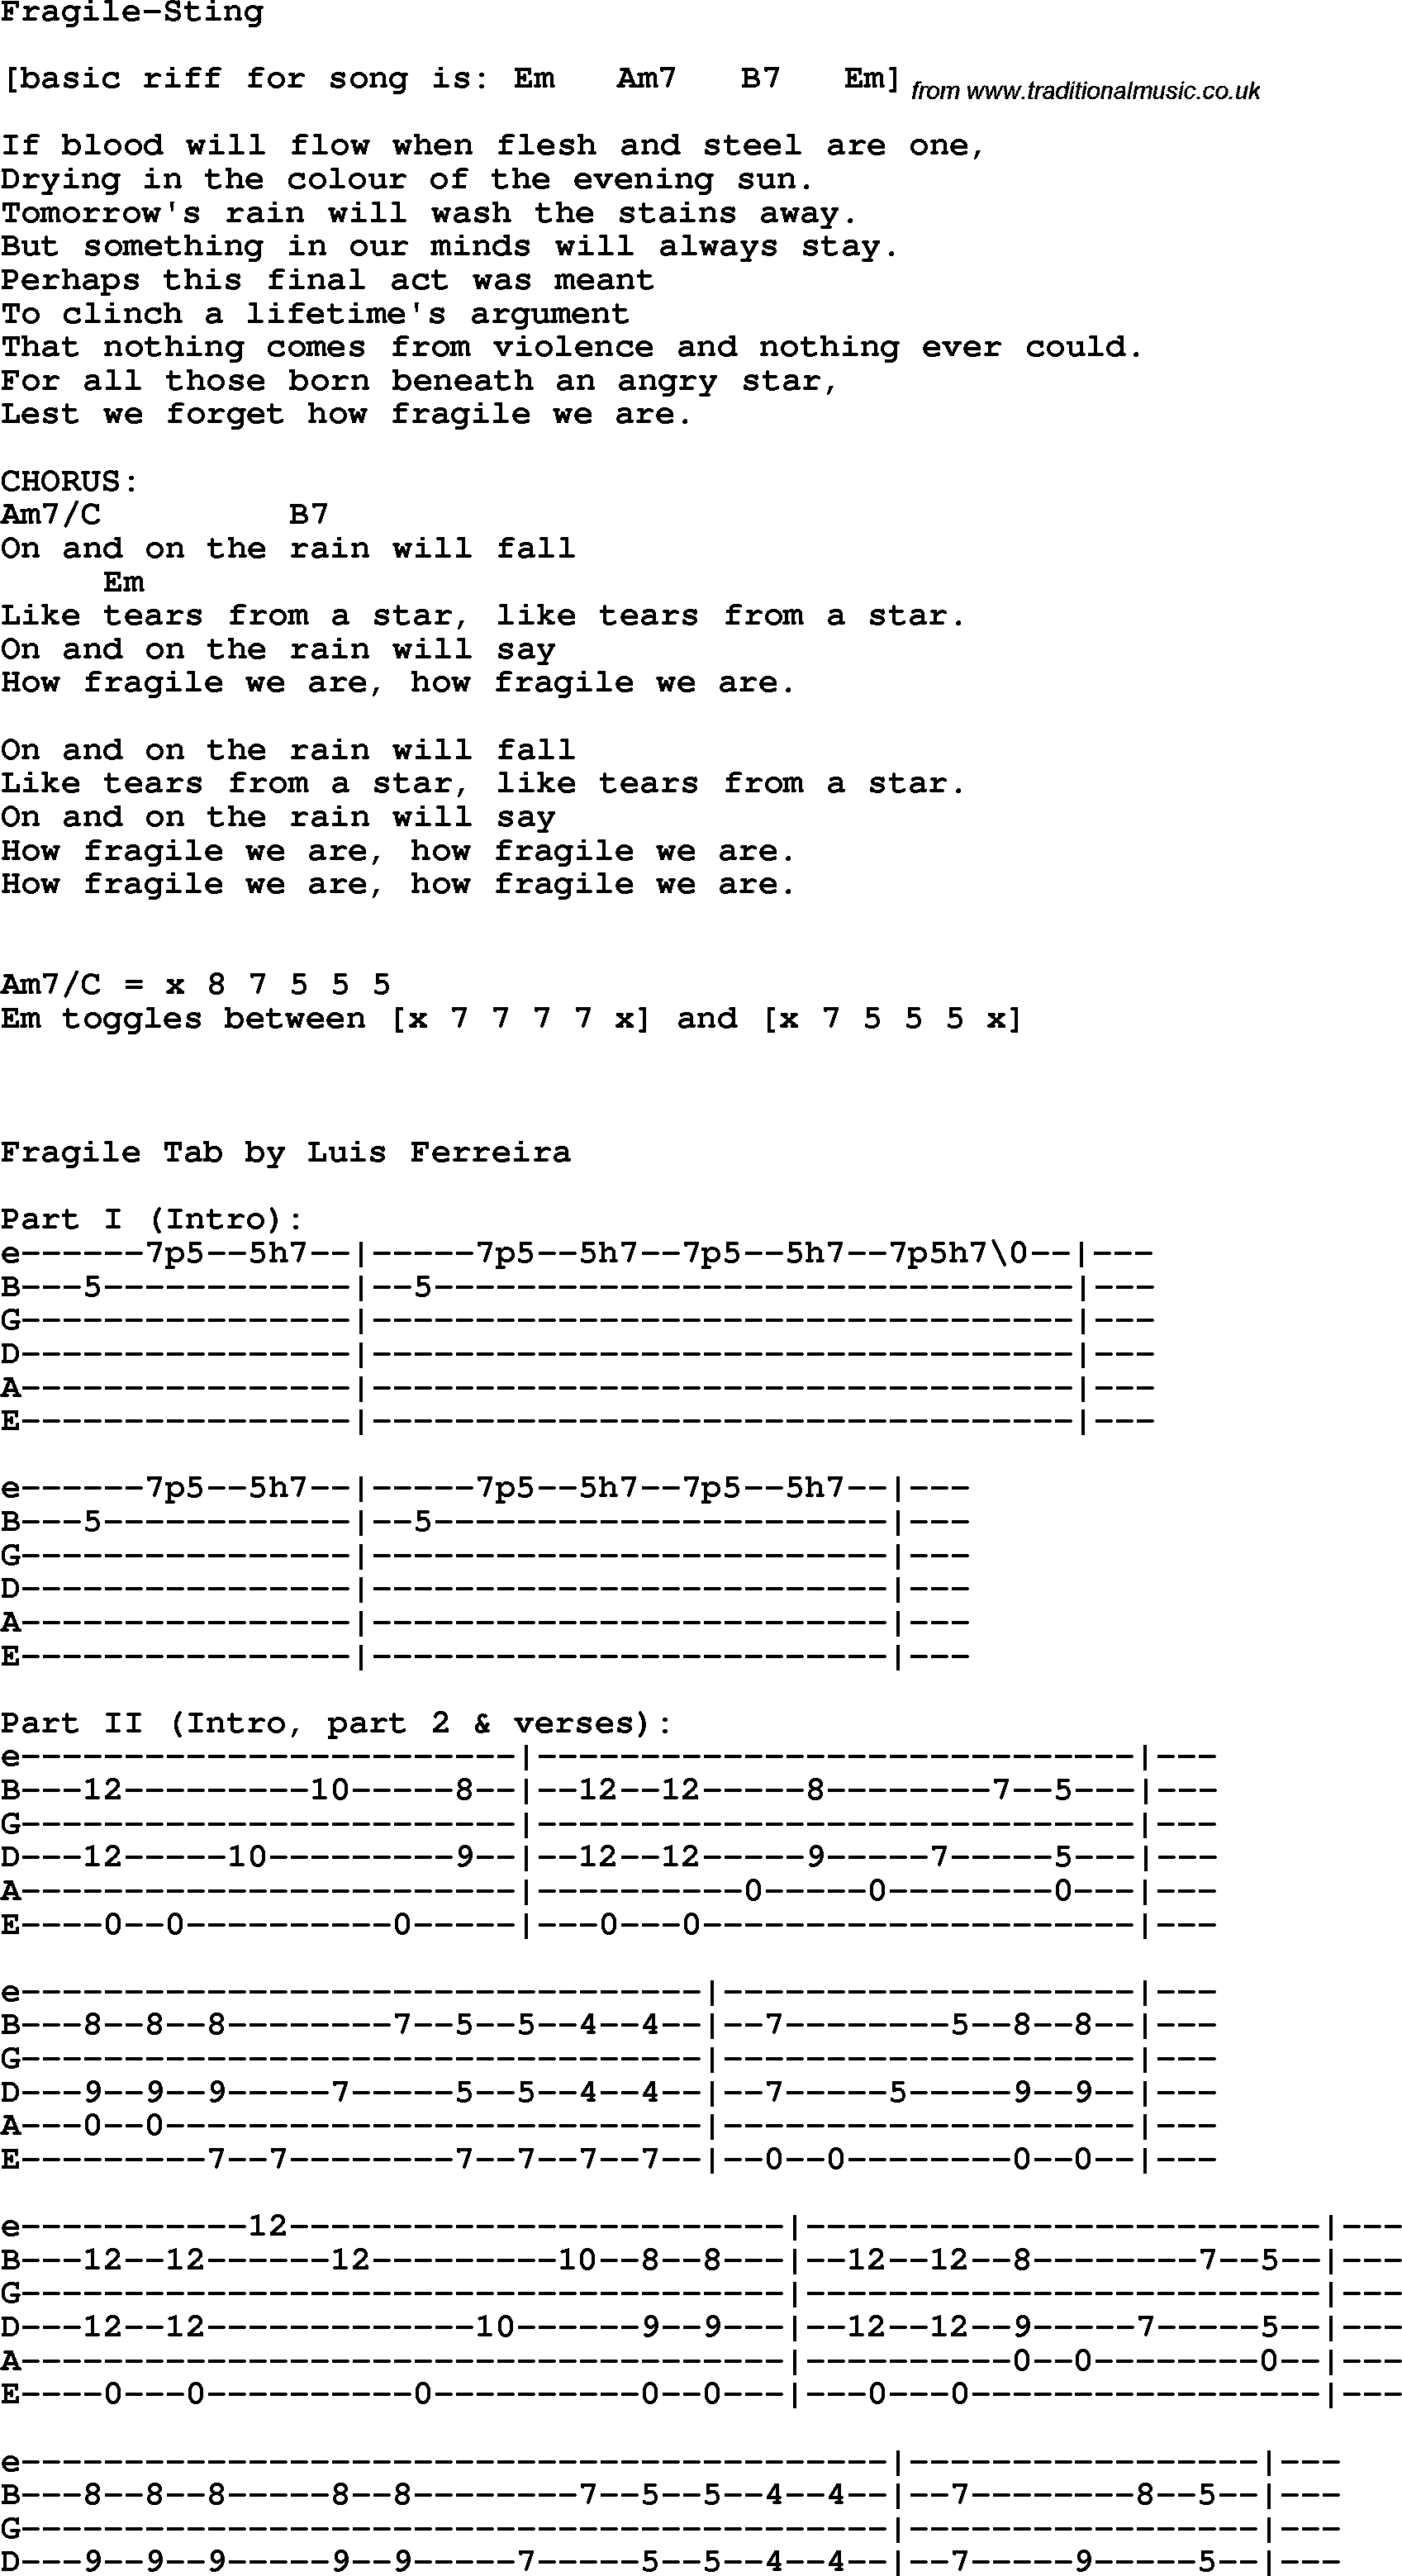 Protest Song Fragile-Sting lyrics and chords